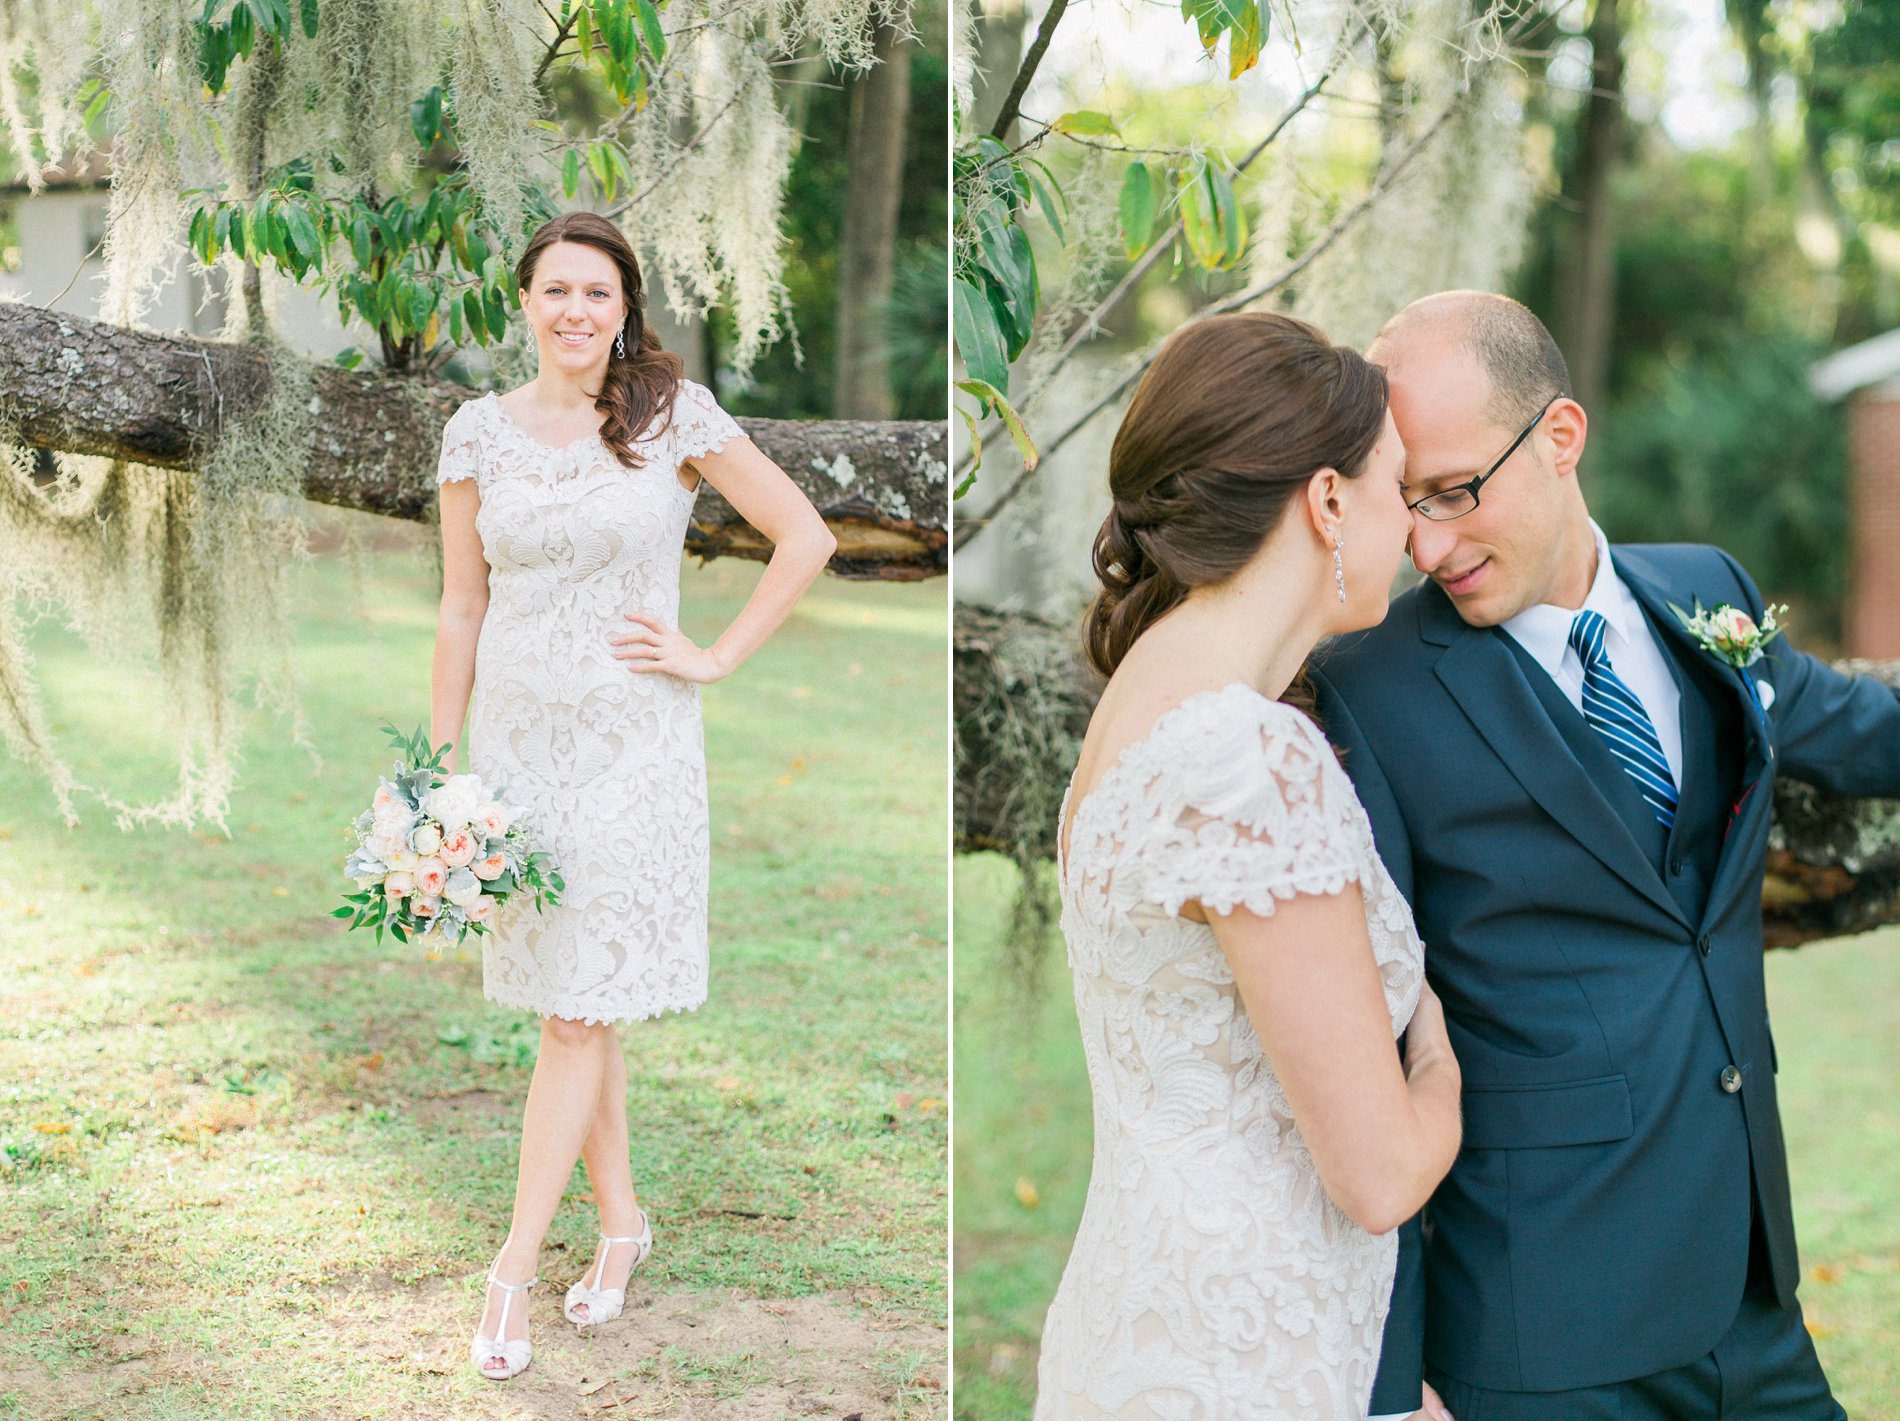 Southern wedding under the Spanish moss